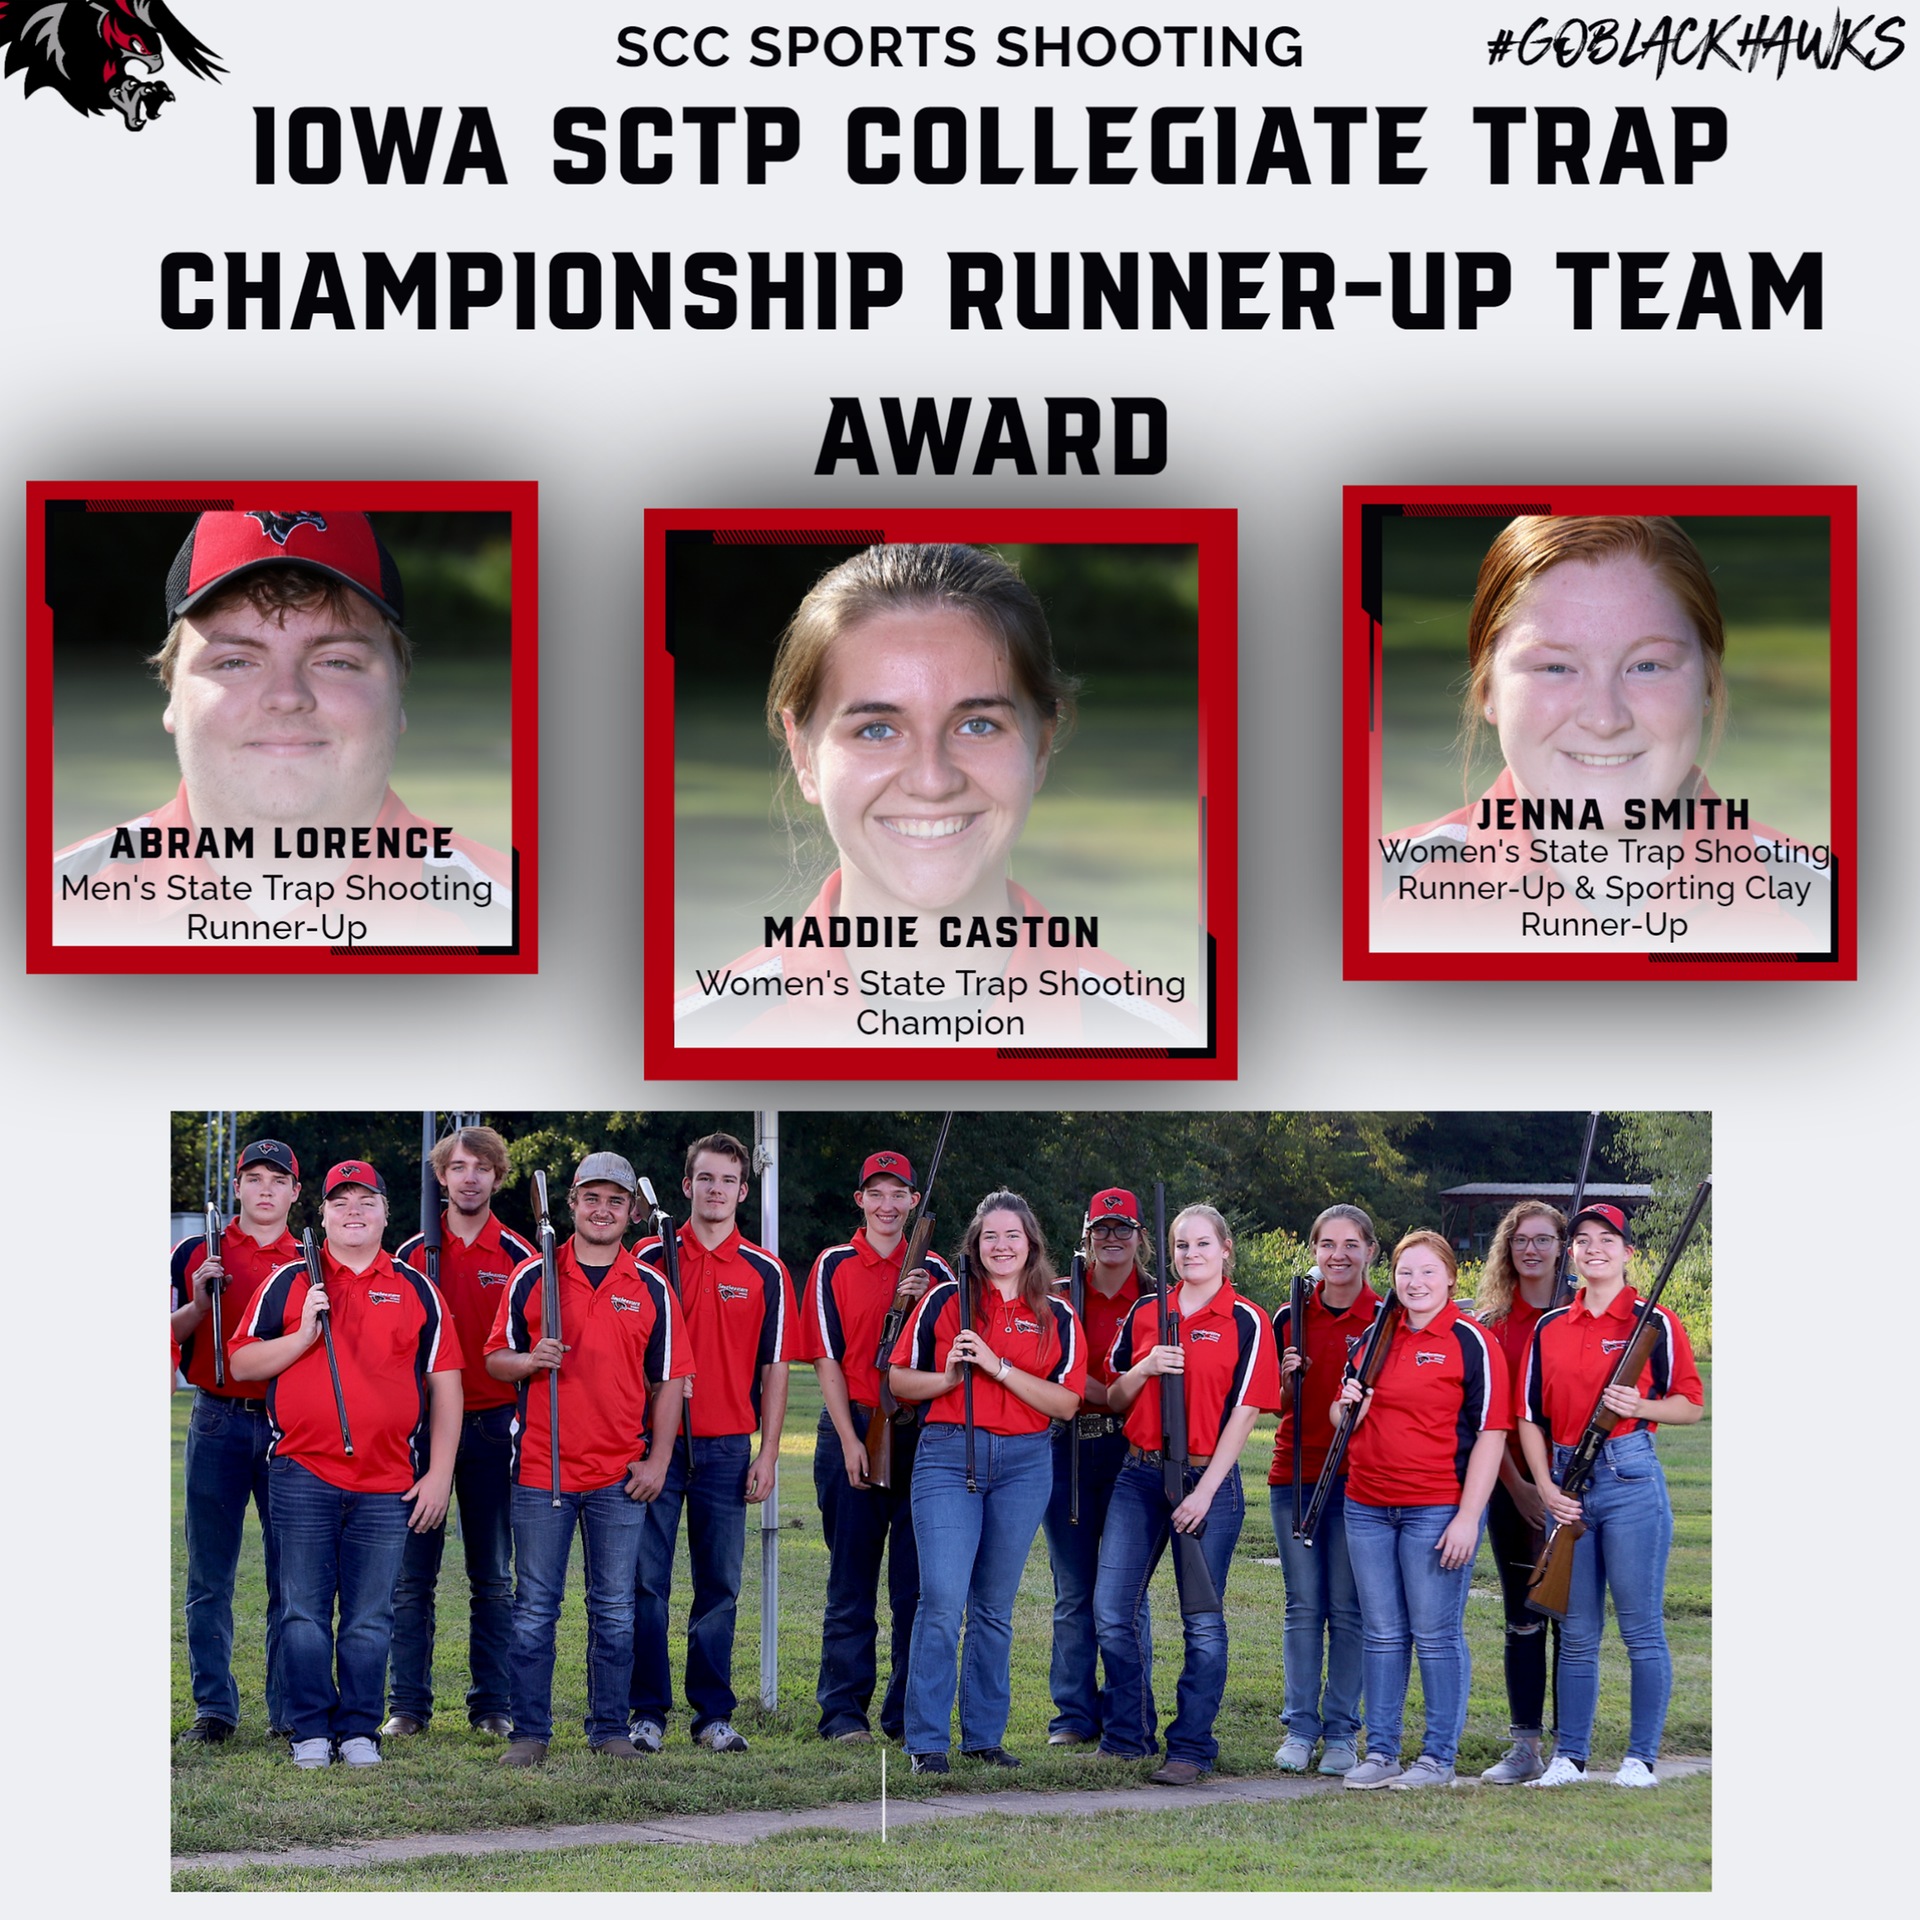 Sports Shooting Earns Iowa SCTP Collegiate Trap Runner-Up Award